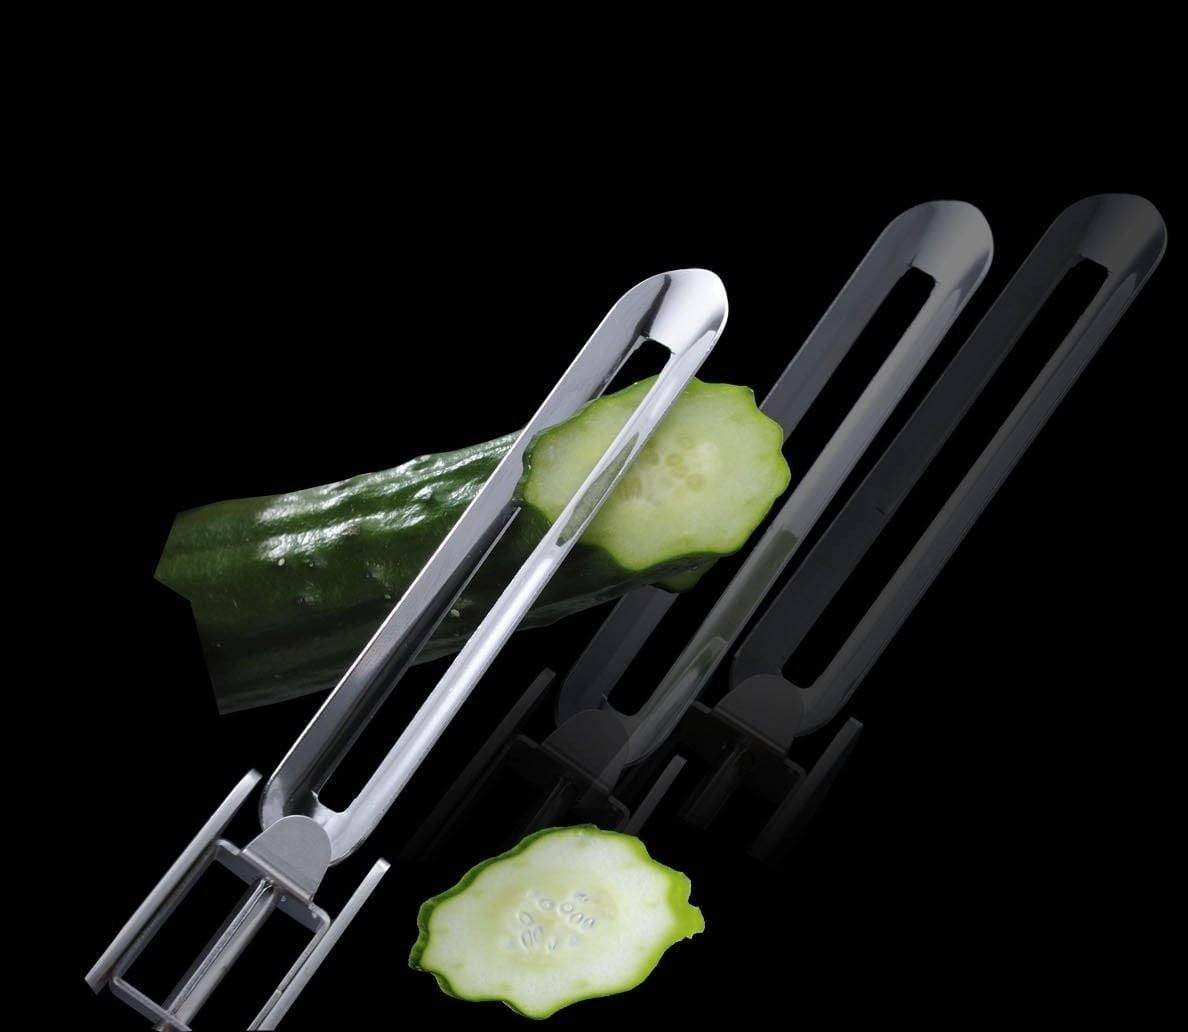 KitchenCraft Stainless Steel Safety Vegetable Peeler